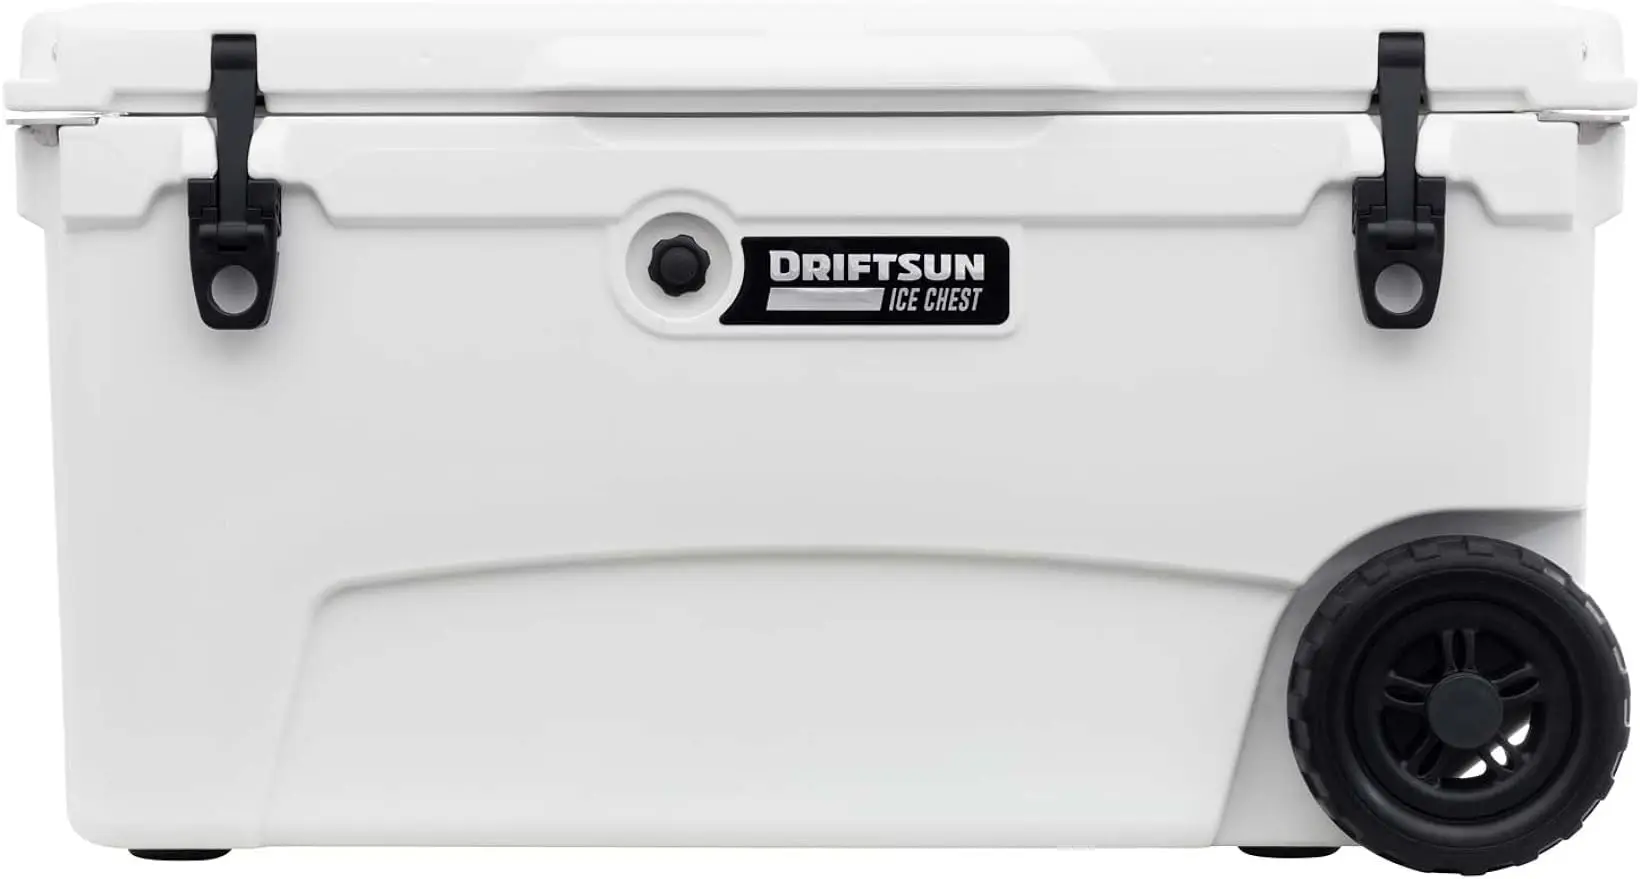 

Driftsun 70qt Wheeled Ice Chest - Heavy Duty, High Performance Roto-Molded Commercial Grade Insulated Rolling Cooler (White)